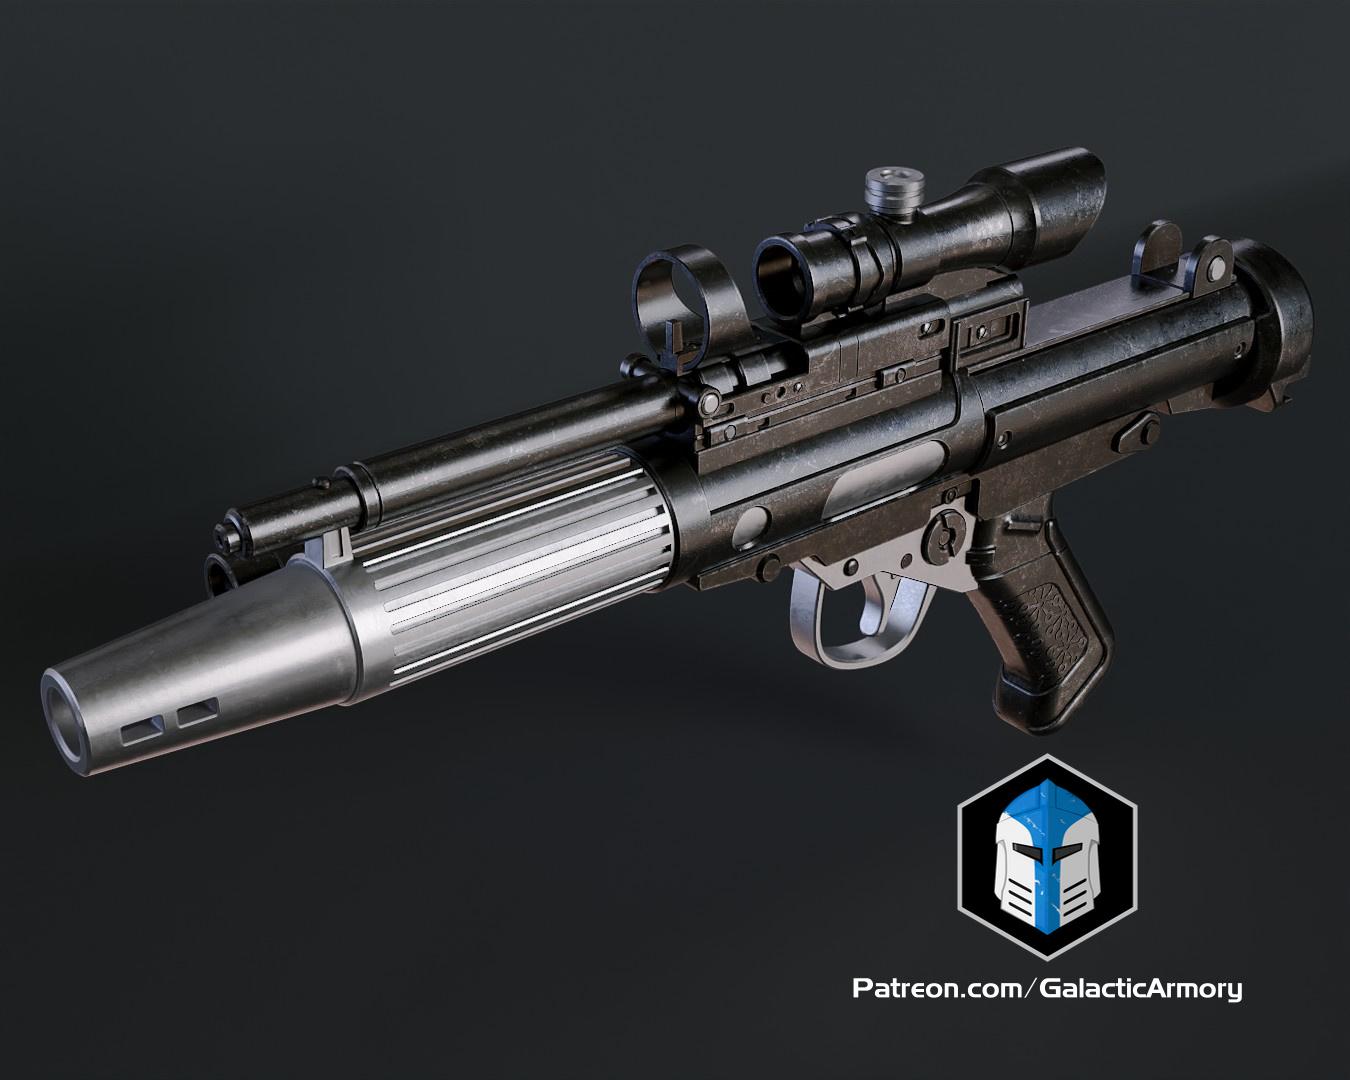 [New Files!] The DH-17 Blaster has been added to the February Specialist rewards!
